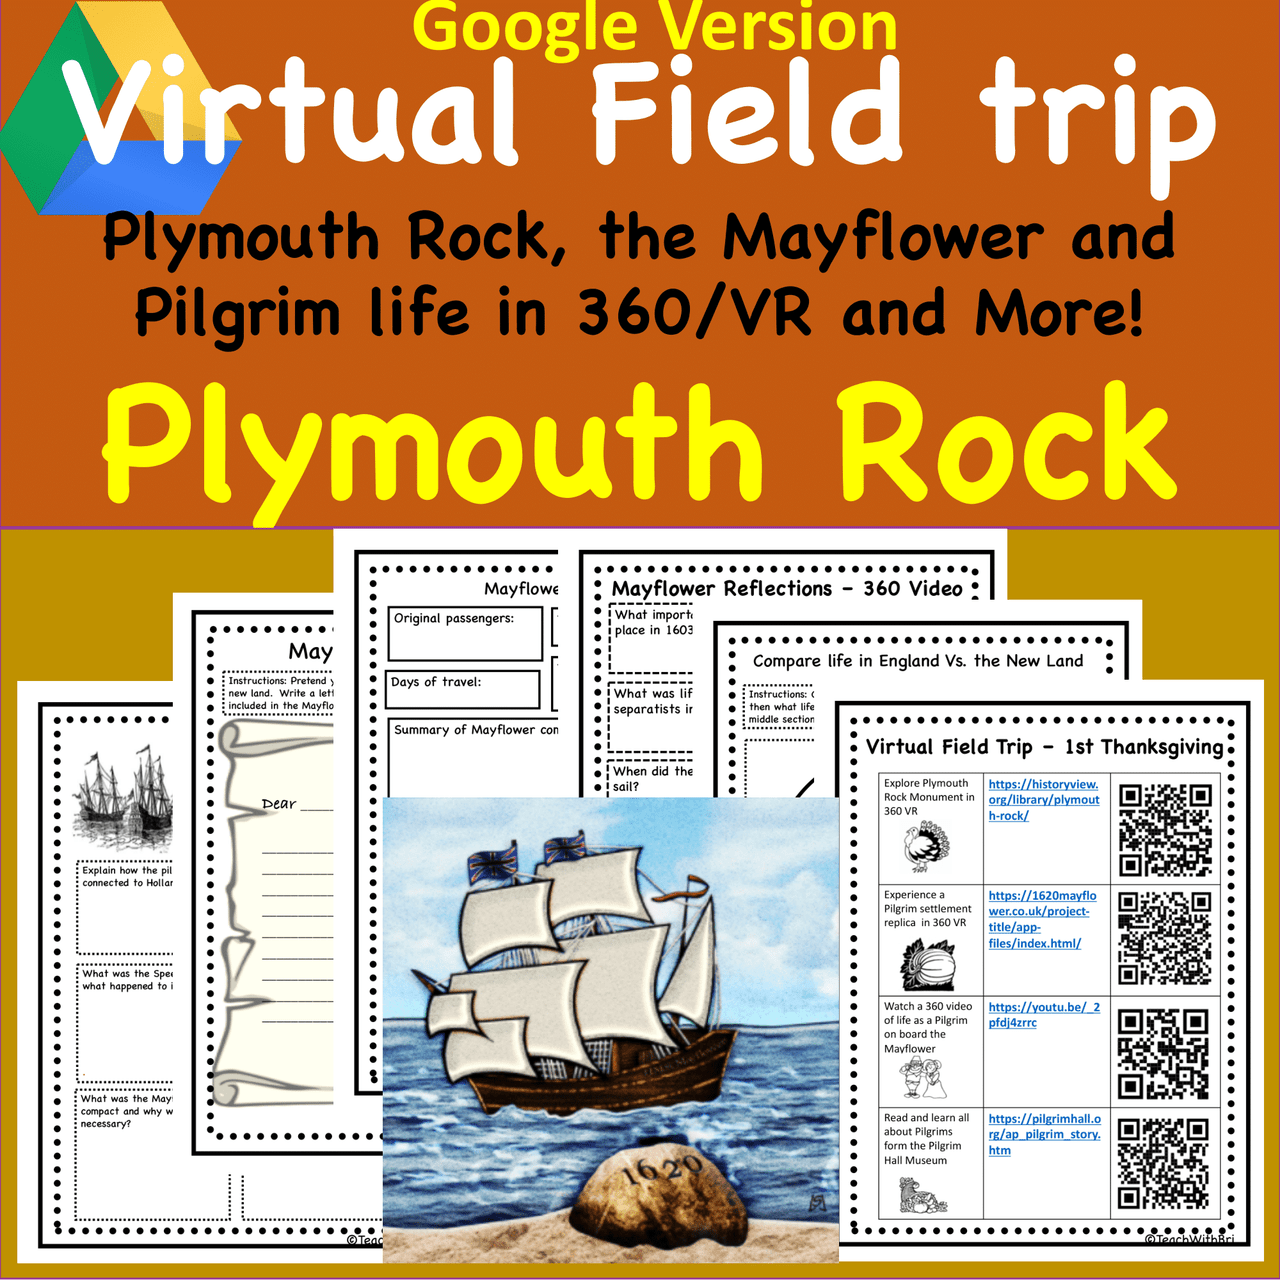 Digital Version: Virtual Field Trip to Plymouth Rock - 1st Thanksgiving History - Mayflower/Pilgrims in 360 and VR 